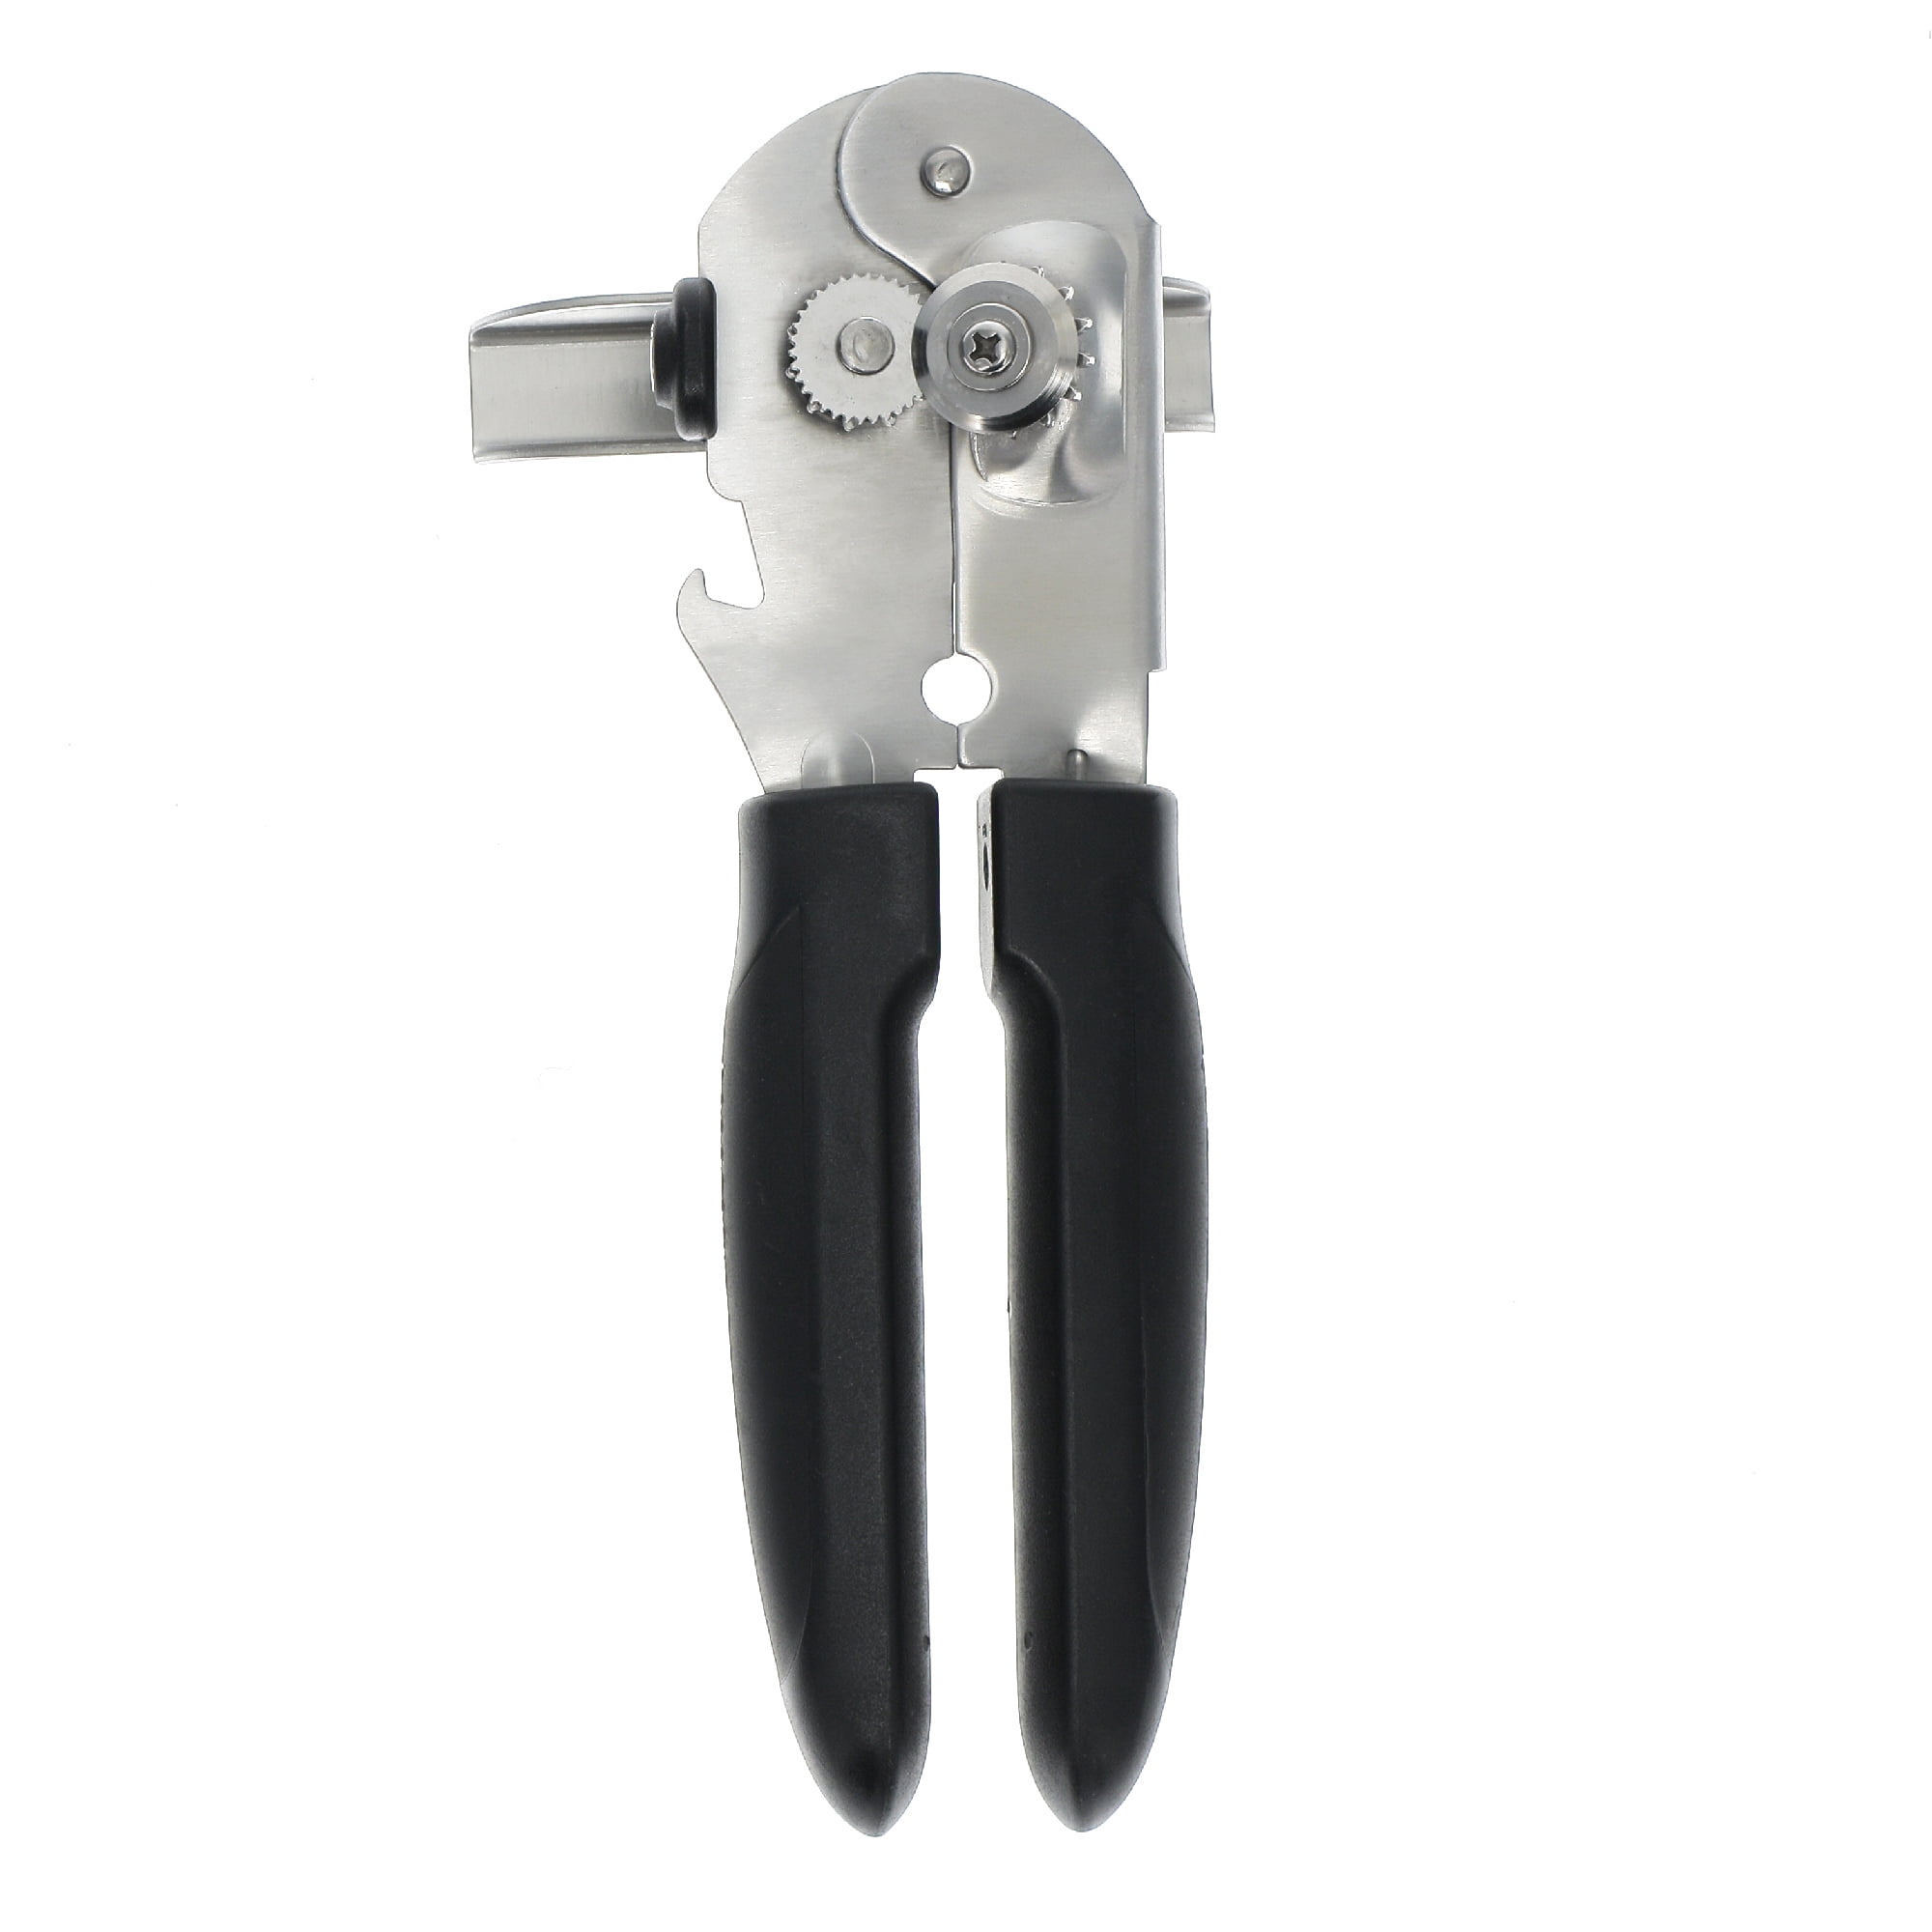 Focus Foodservice Magnetic Wall Mount Can Opener, S/S, White - Chef City  Restaurant Supply